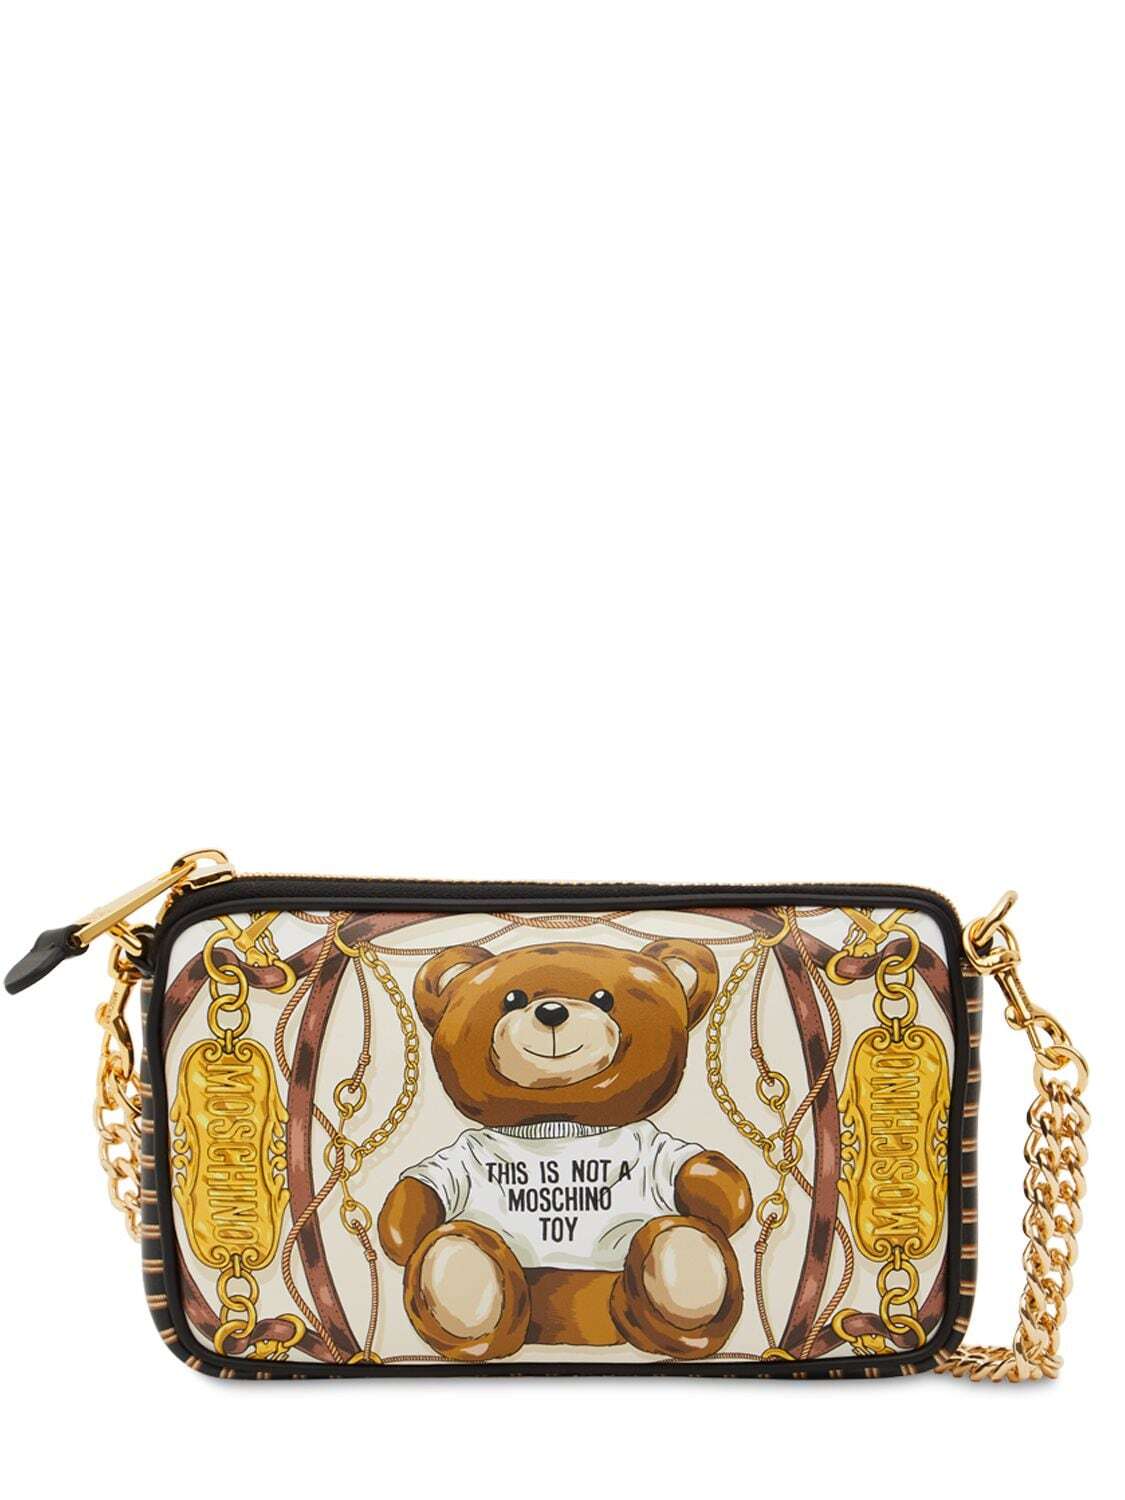 MOSCHINO Teddy Printed Leather Shoulder Bag in ivory / multi